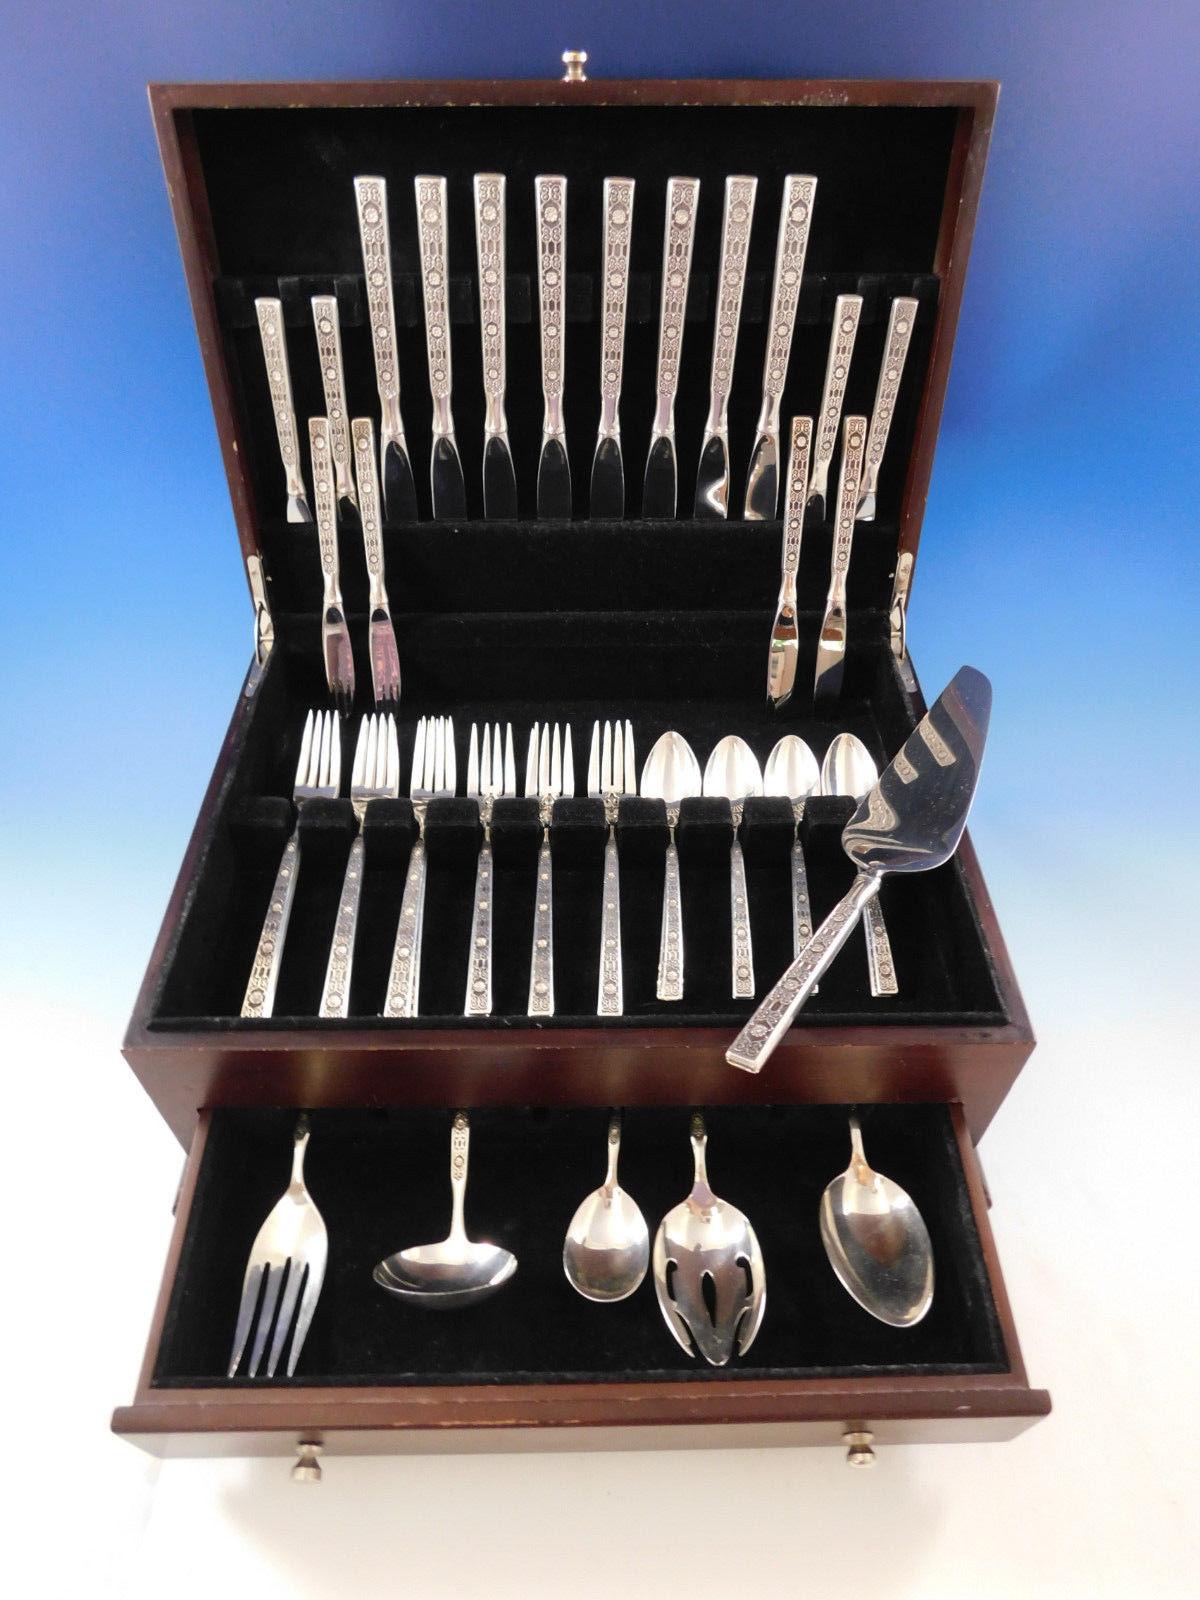 Spanish Tracery by Gorham Mediterranean style sterling silver flatware set of 46 pieces. This set includes:

Eight place knives, 9